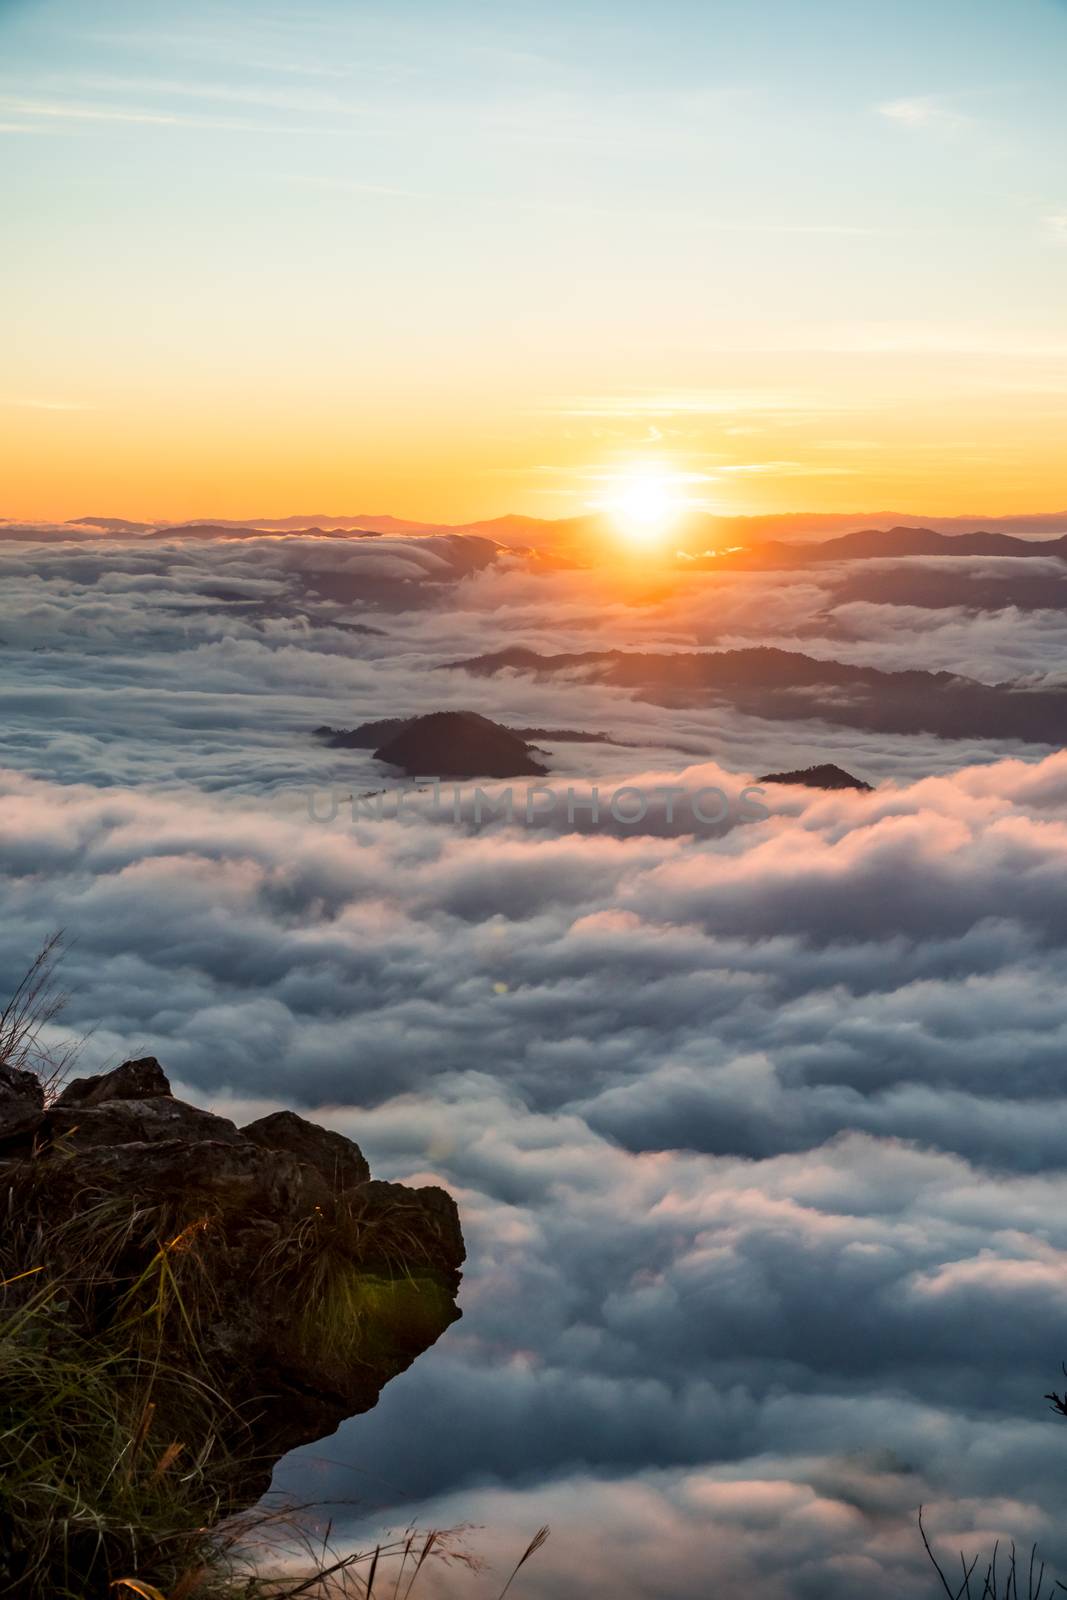 sunrise and sea of fog view on phu chi fa mountain area and national forest park in chiang rai, Thailand.